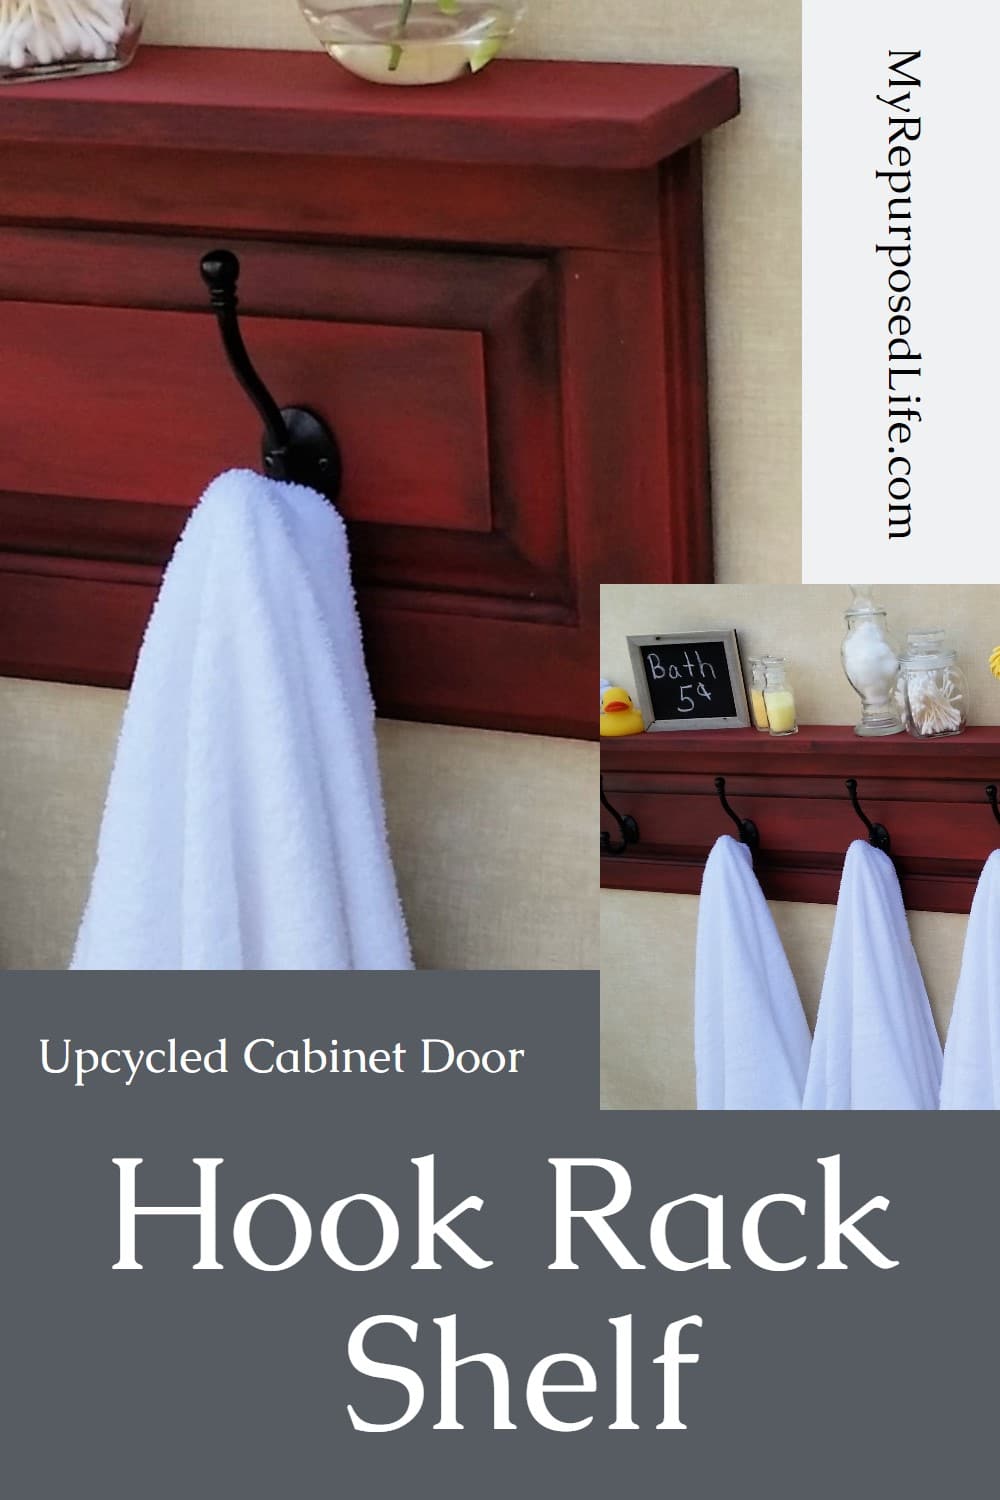 This Coat Rack Shelf is made from a cabinet door. This tutorial will show you how to make this, plus show you how to easily achieve this fabulous paint color. #MyRepurposedLife #repurposed #cabinet #door #shelf via @repurposedlife